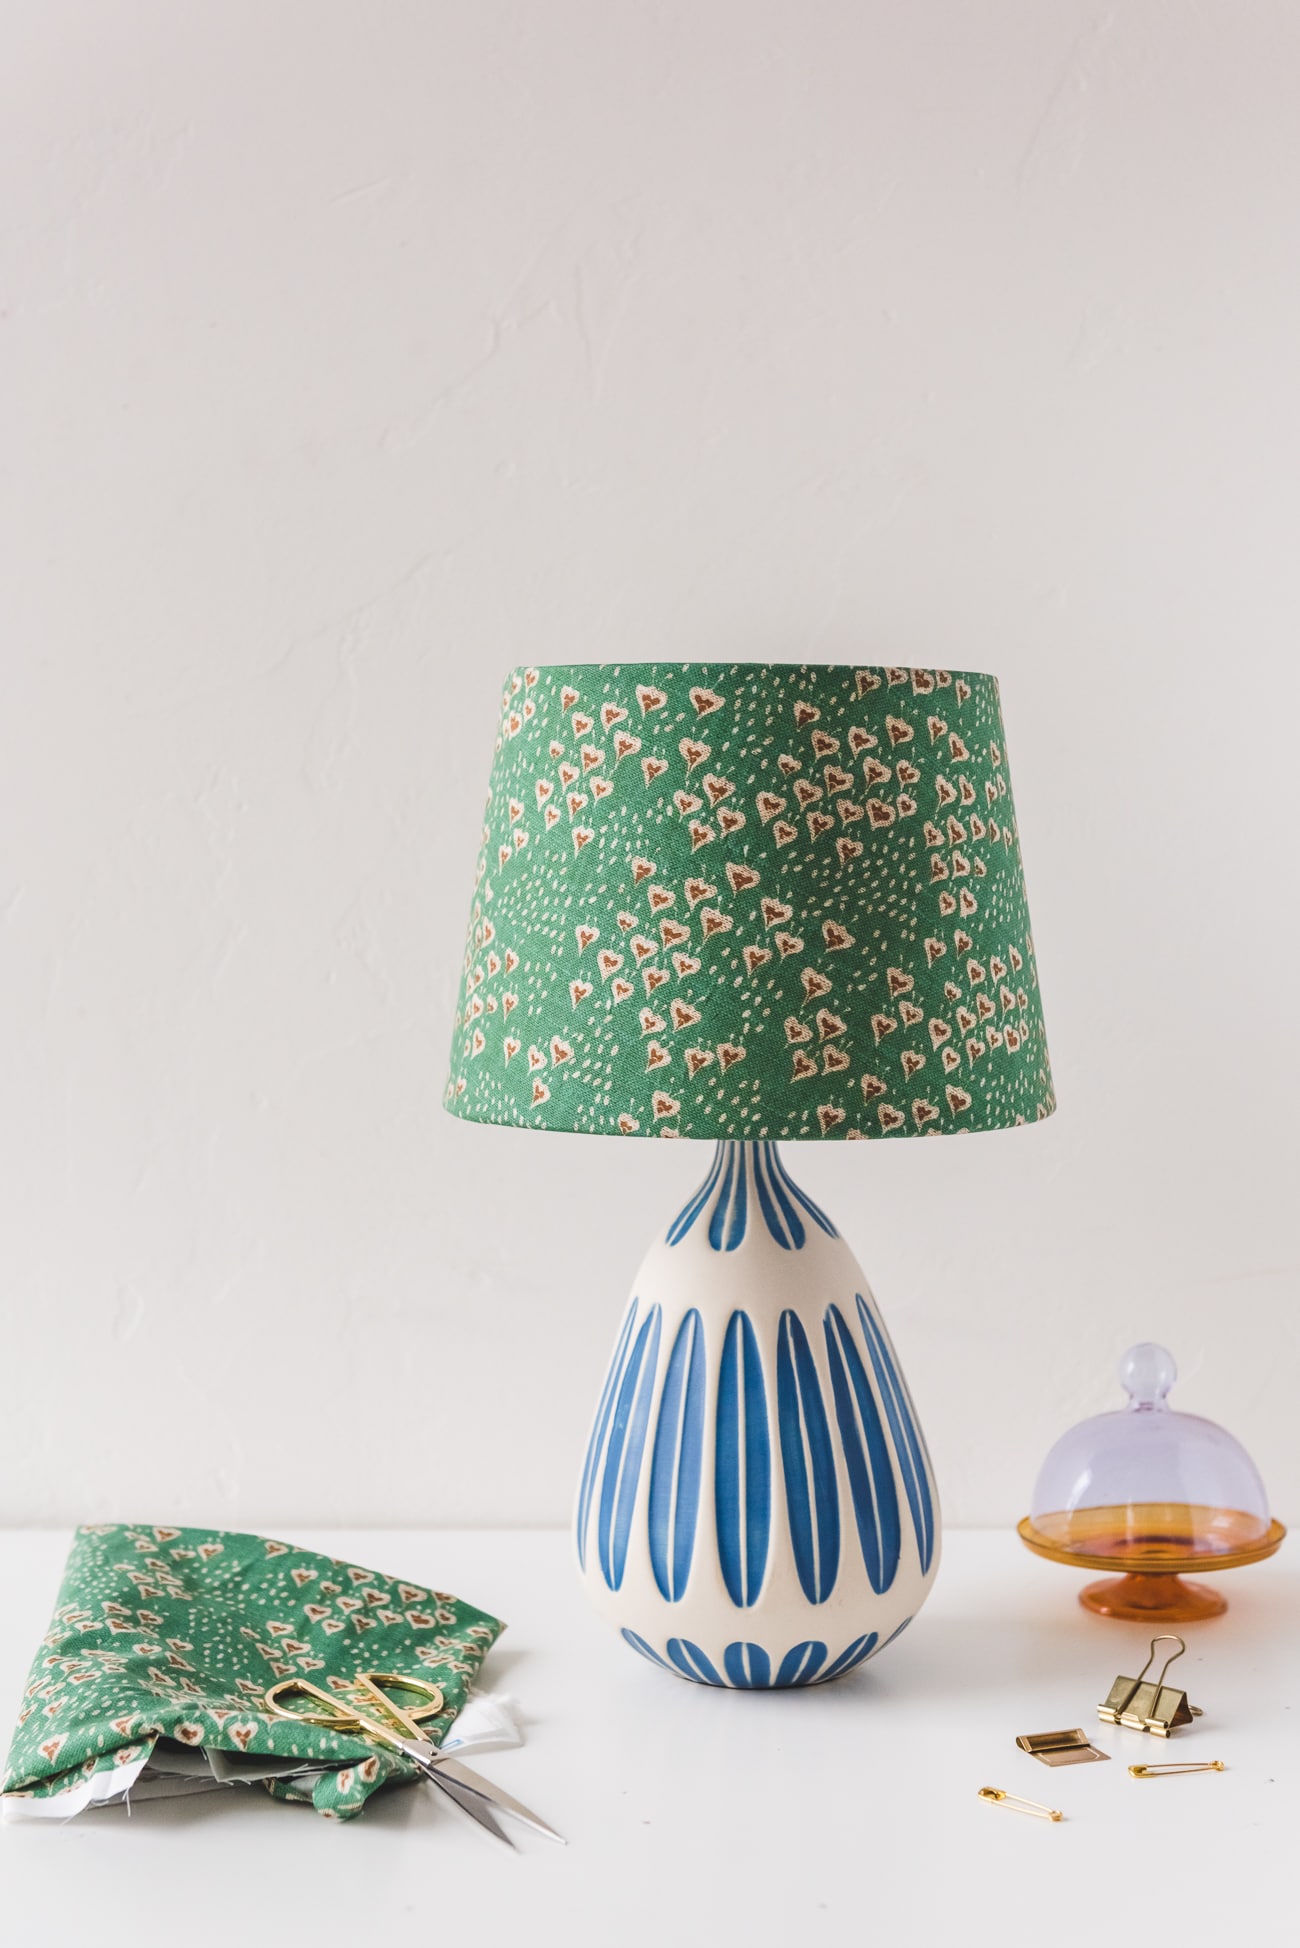 3 Diy Lampshades Made With Unexpected, How To Make Your Own Table Lamp Shades